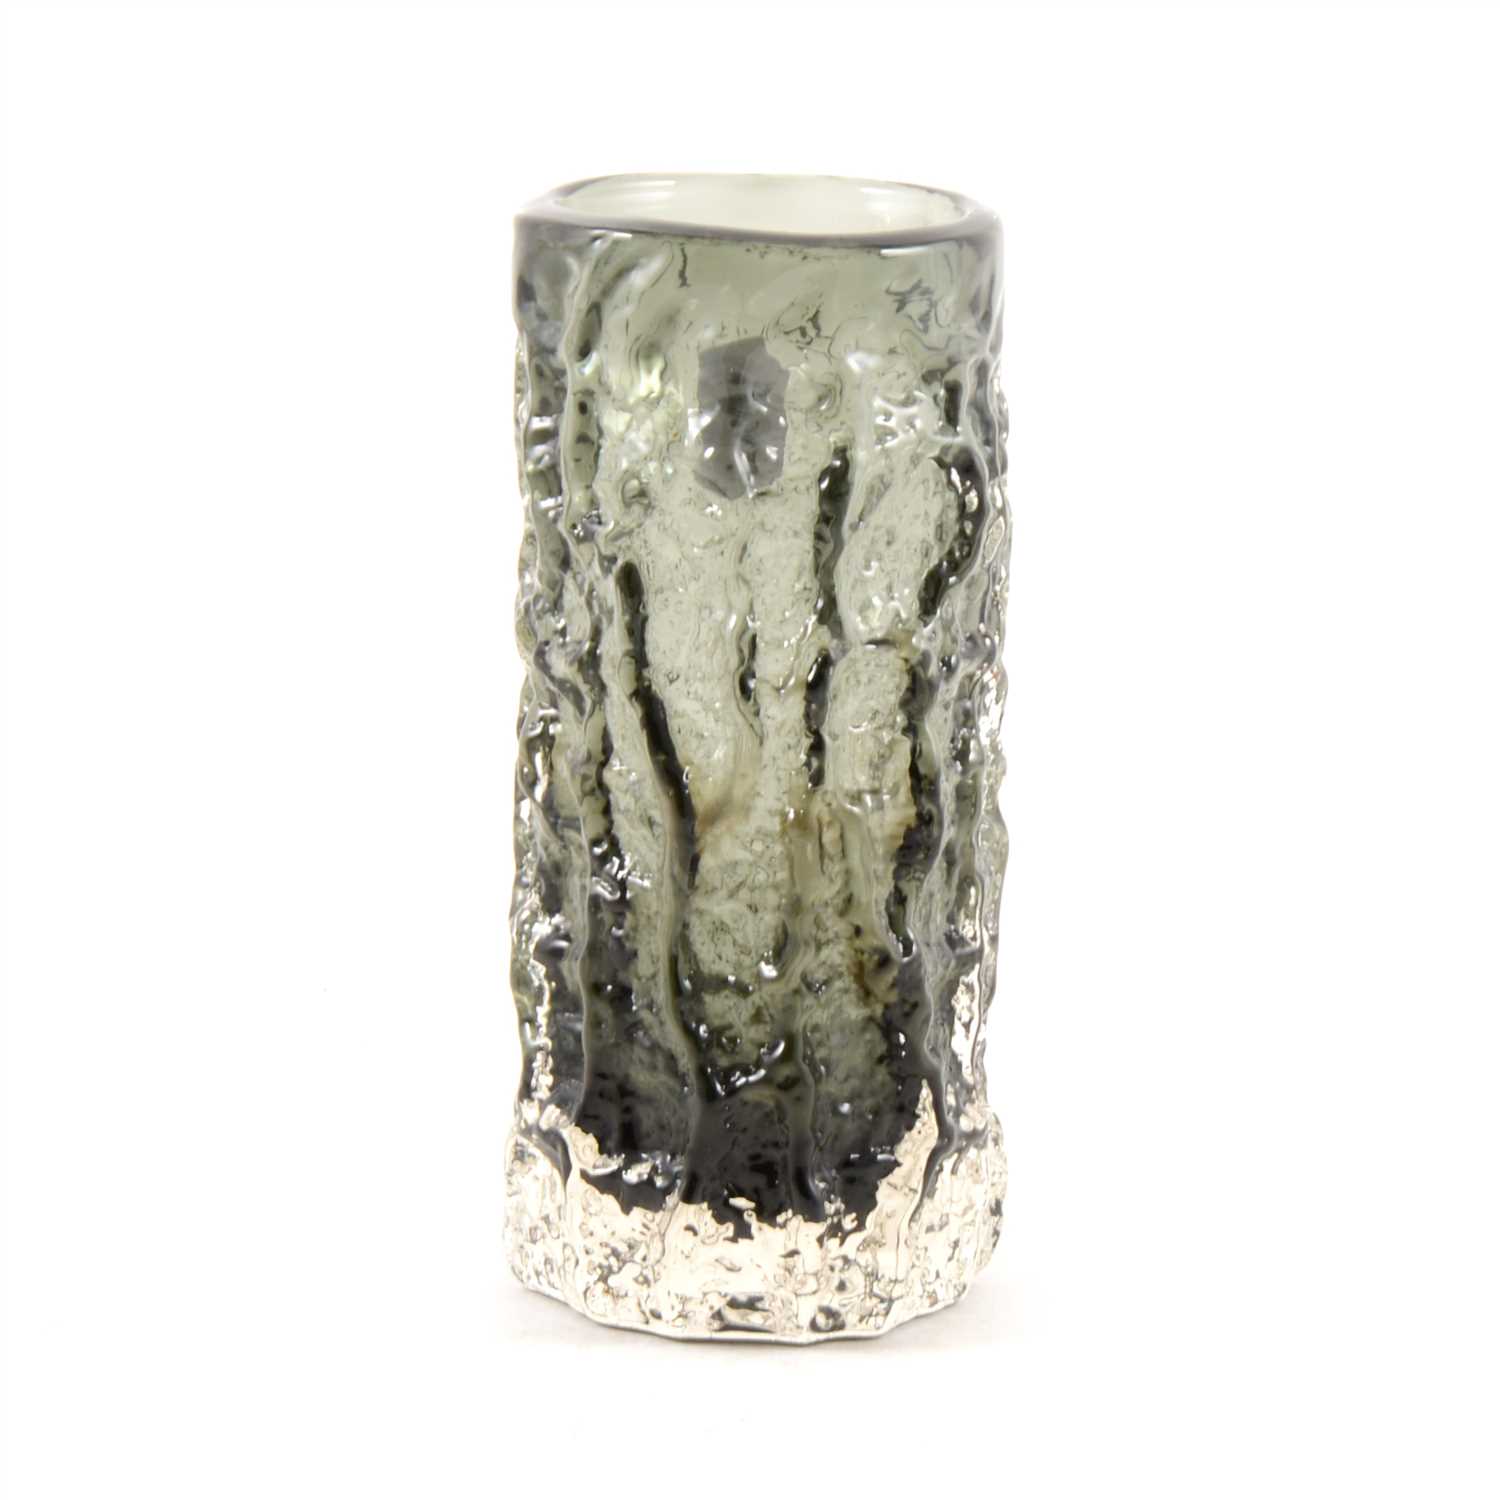 Lot 33 - Whitefriars Textured Glass vase, bark effect, pewter colourway